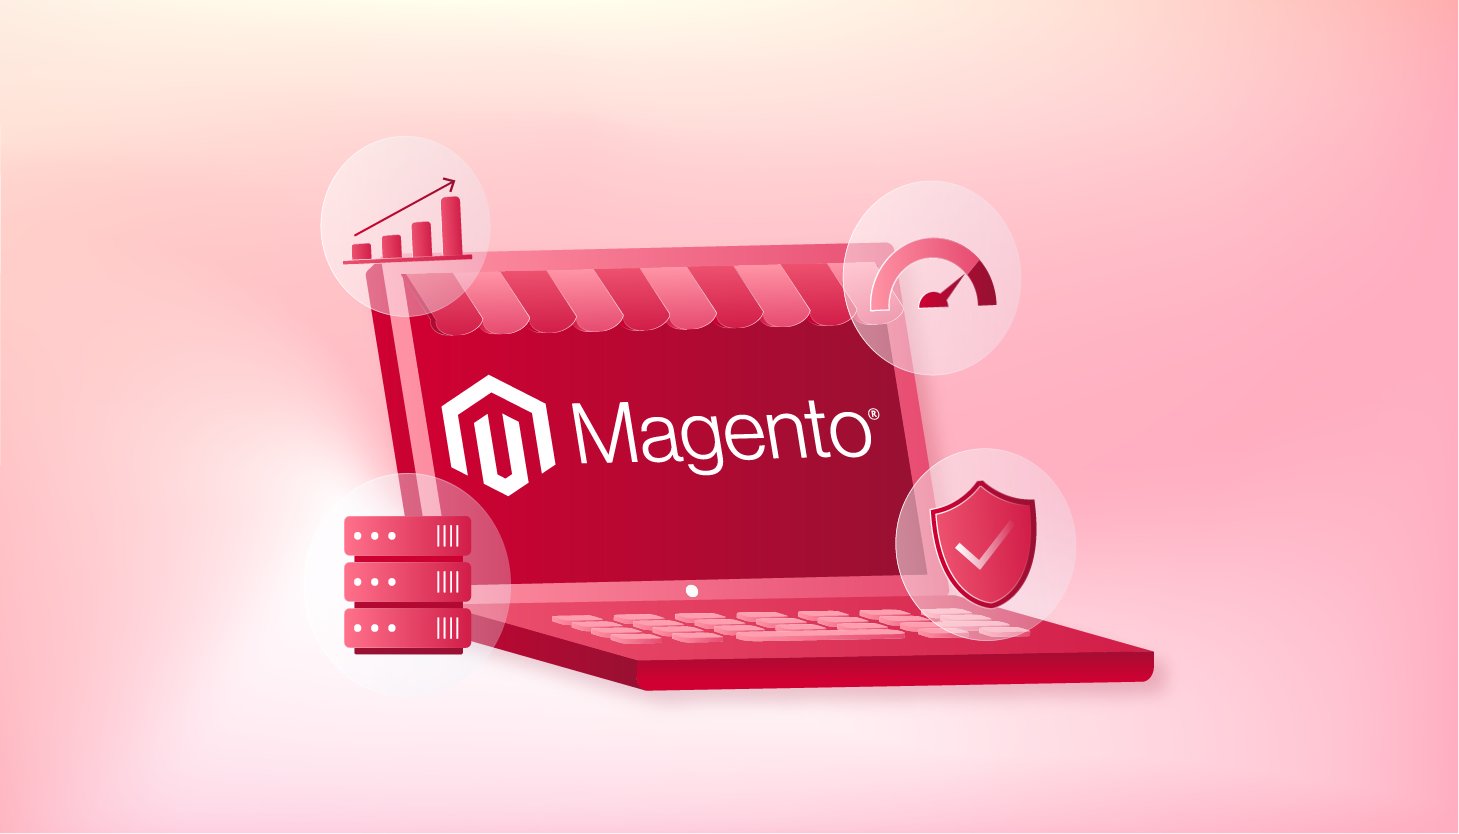 Best Magento Hosting Software for Your Business Needs